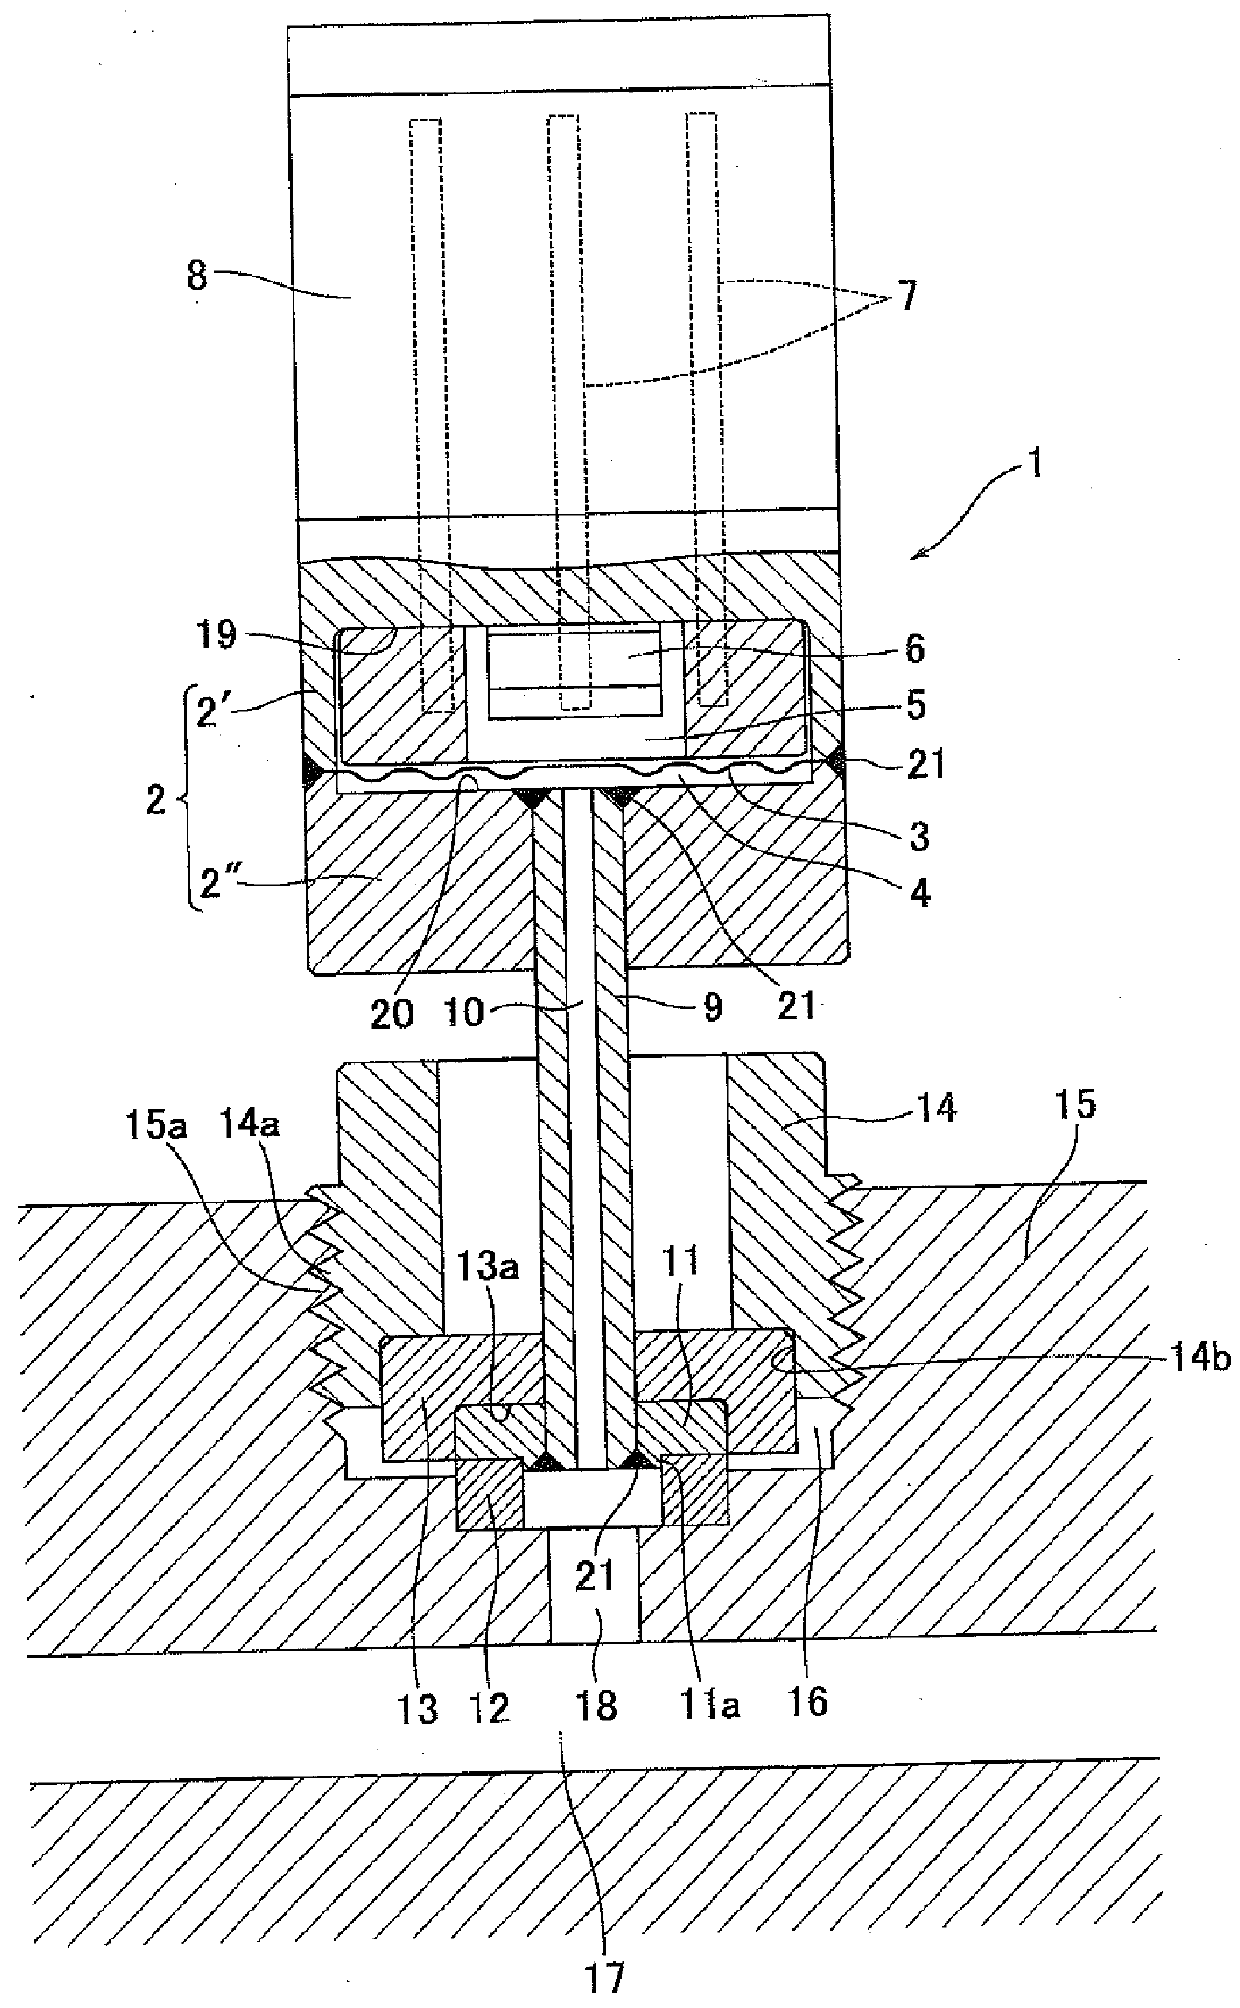 Structure for attaching pressure detector